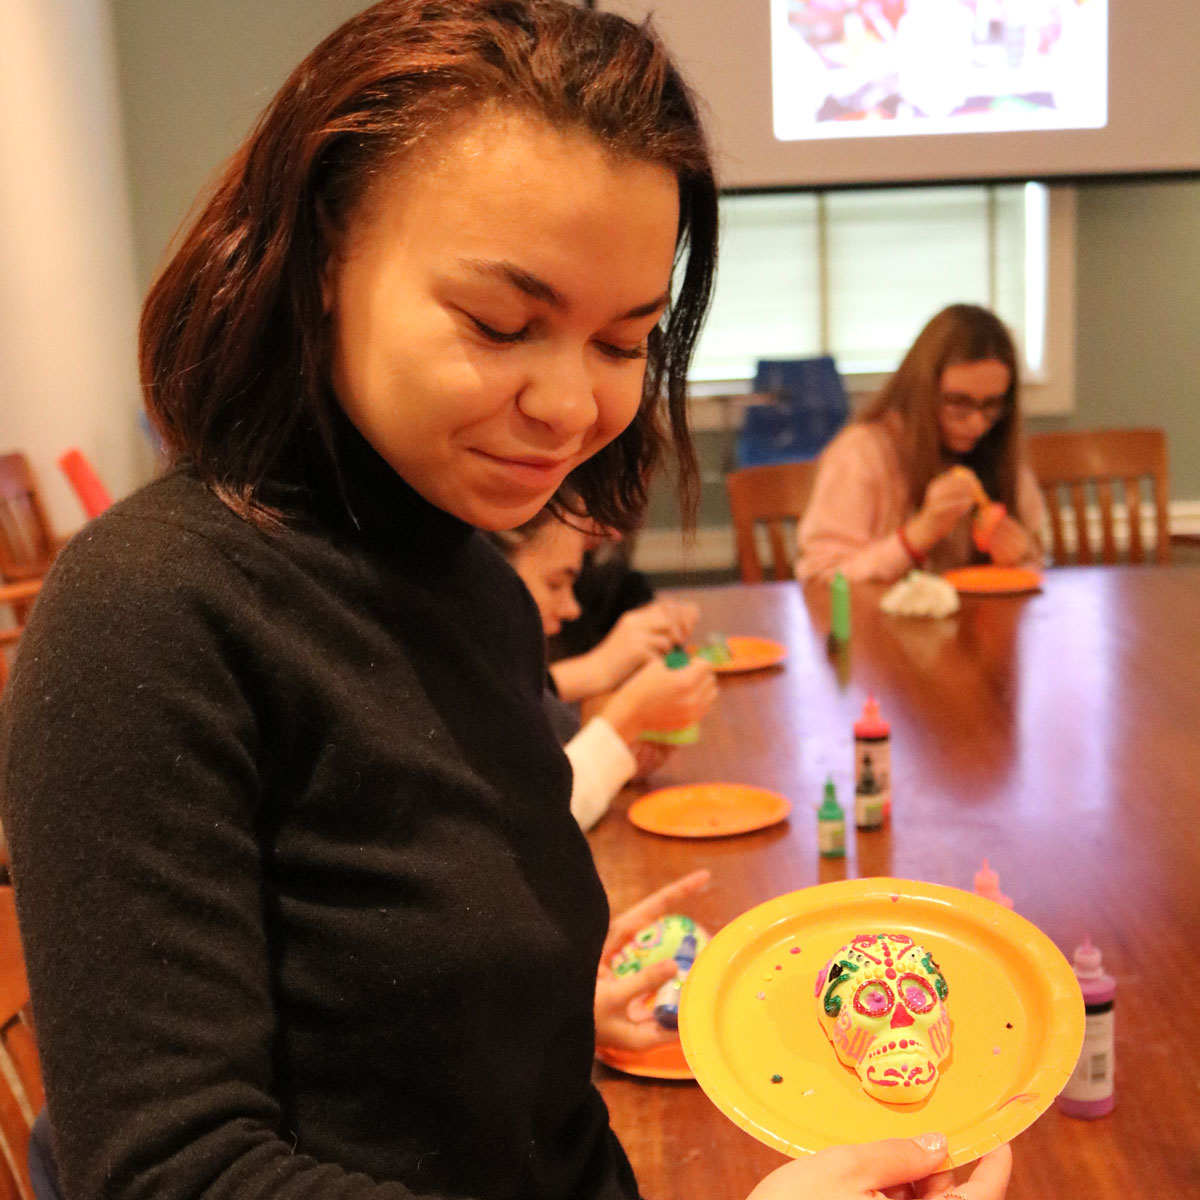 Student Holding Her Self-Painted Sugar Skull.